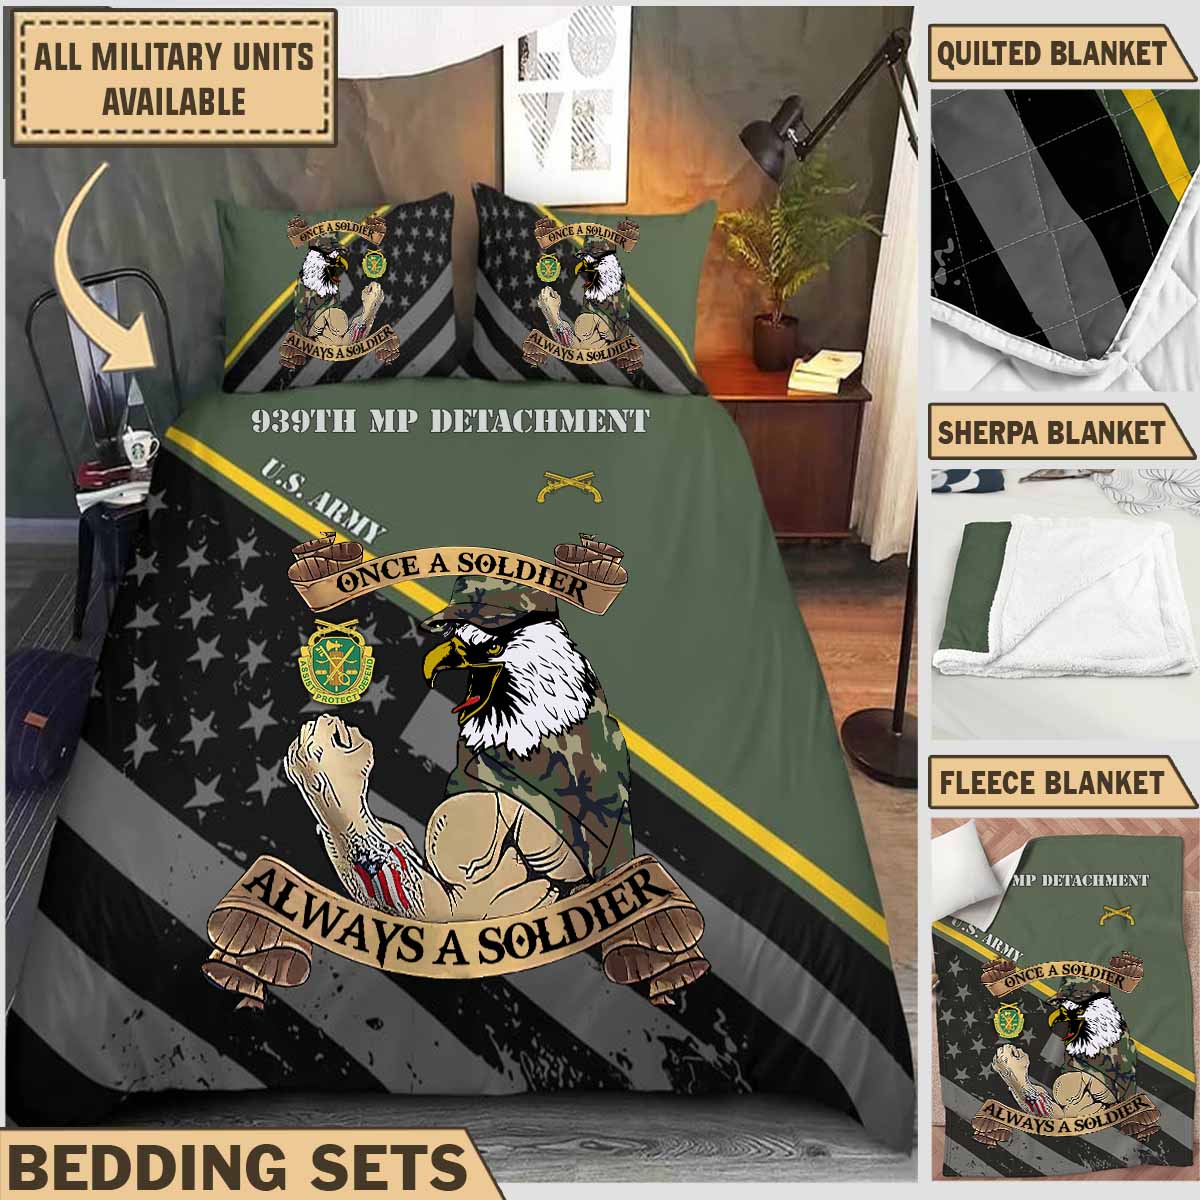 939th MP DET 939th Military Police Detachment_Bedding Collection